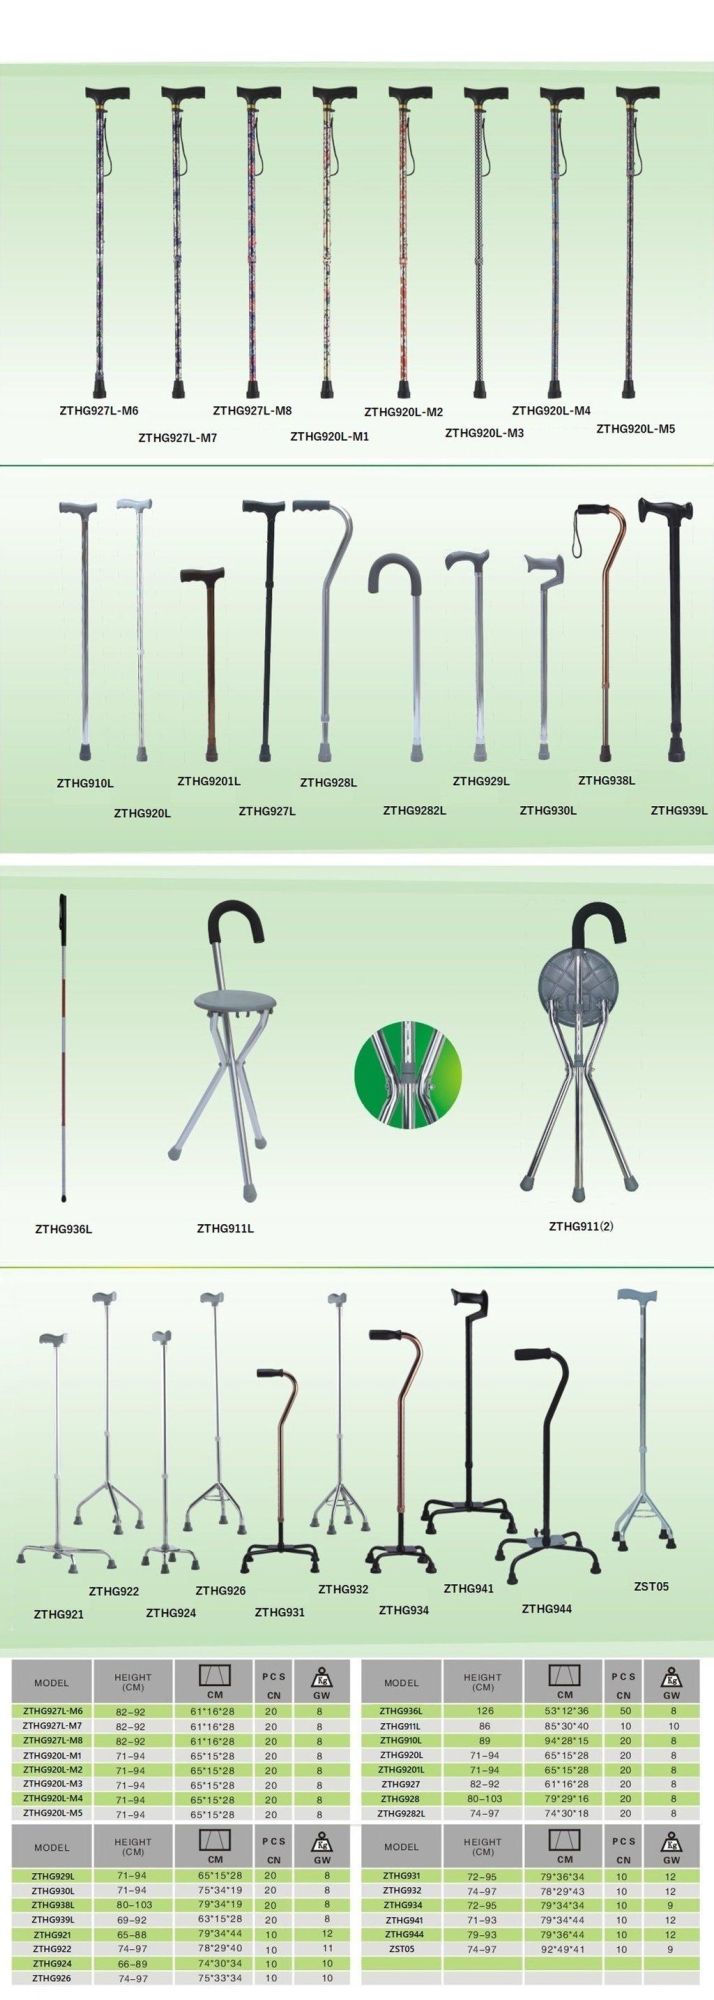 Aluminum Lightweight Adjustable Height Walking Stick T-Shape Colorful Easy Carry Antiskid Orthopedic Rehabilitation Products for Elderly People Outdoor Crutch